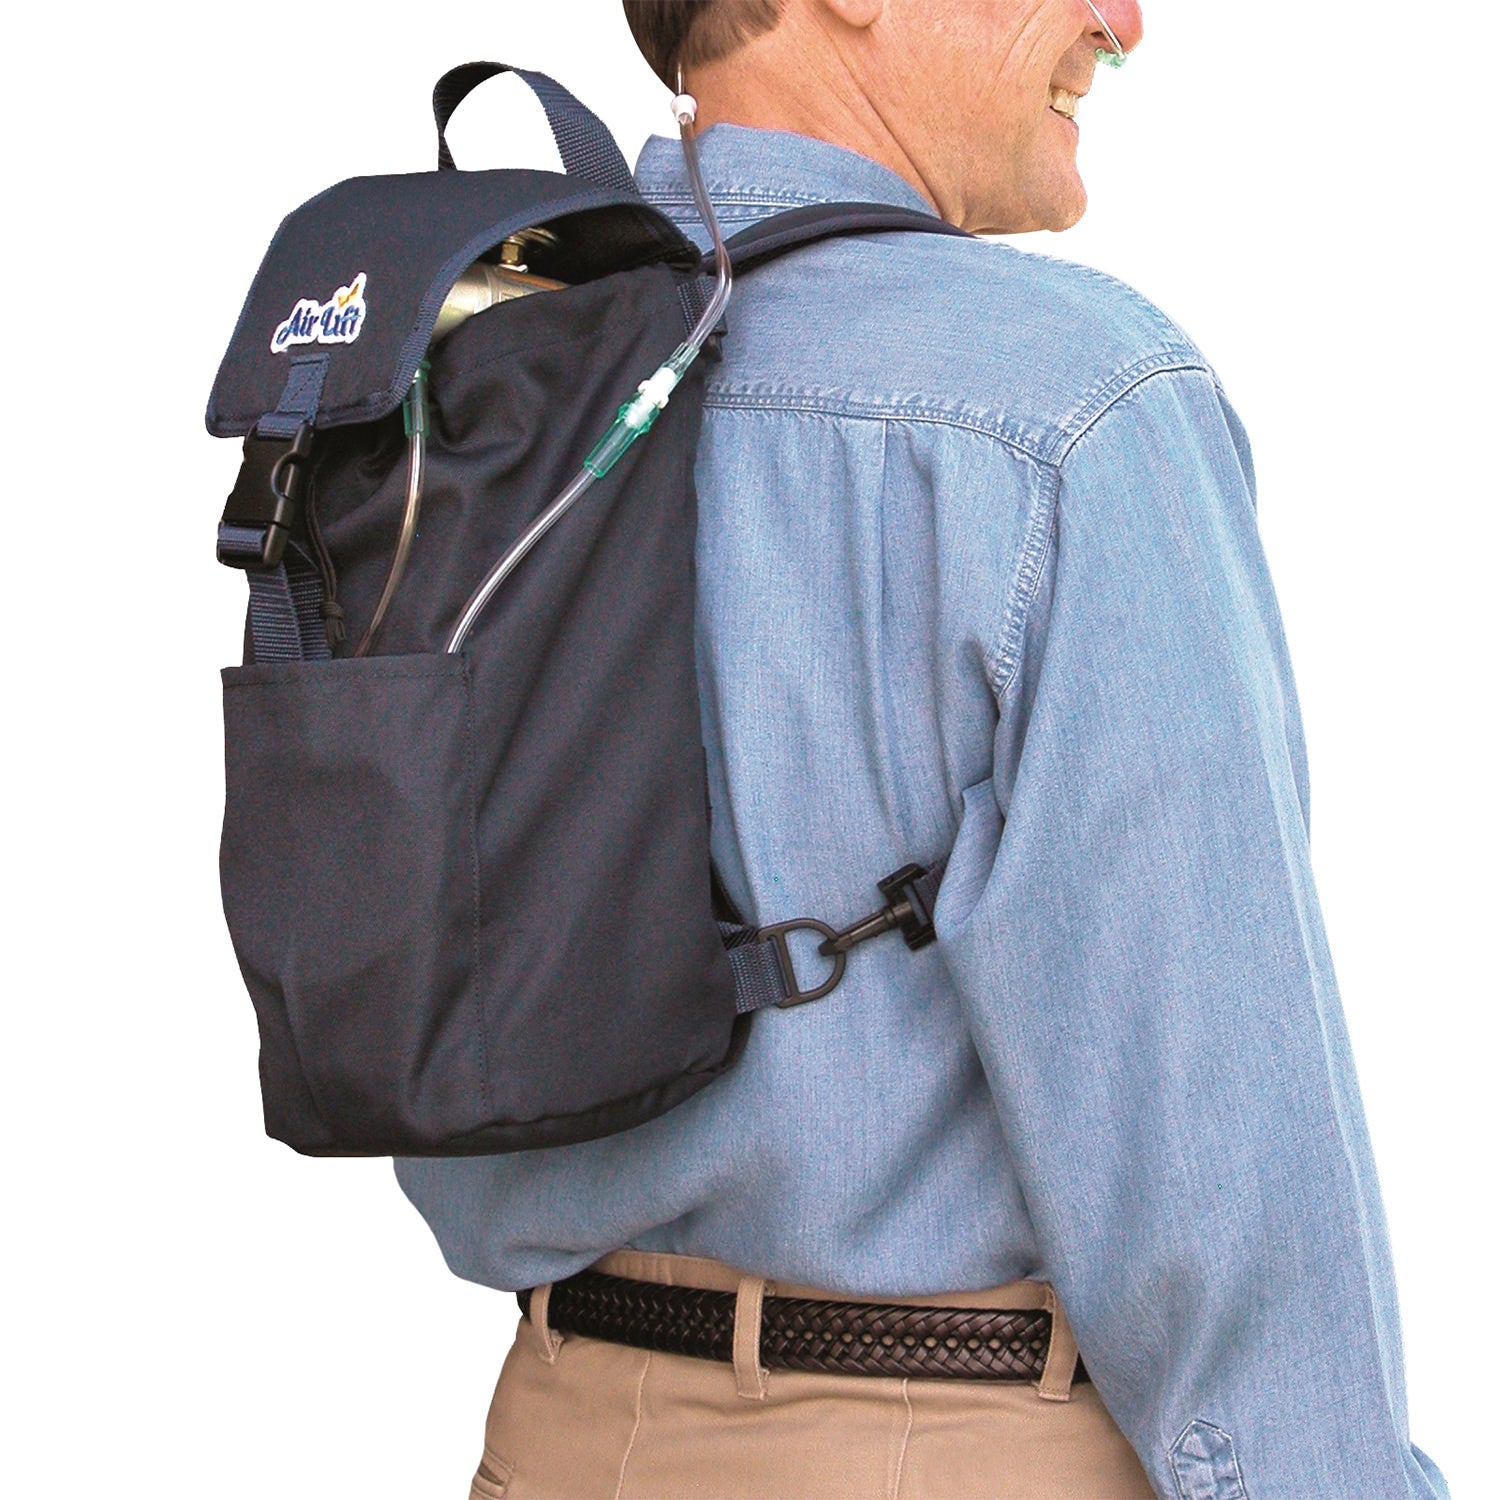 AirLift Backpack Oxygen Carrier-M6, C/M9 or Smaller Oxygen Cylinders